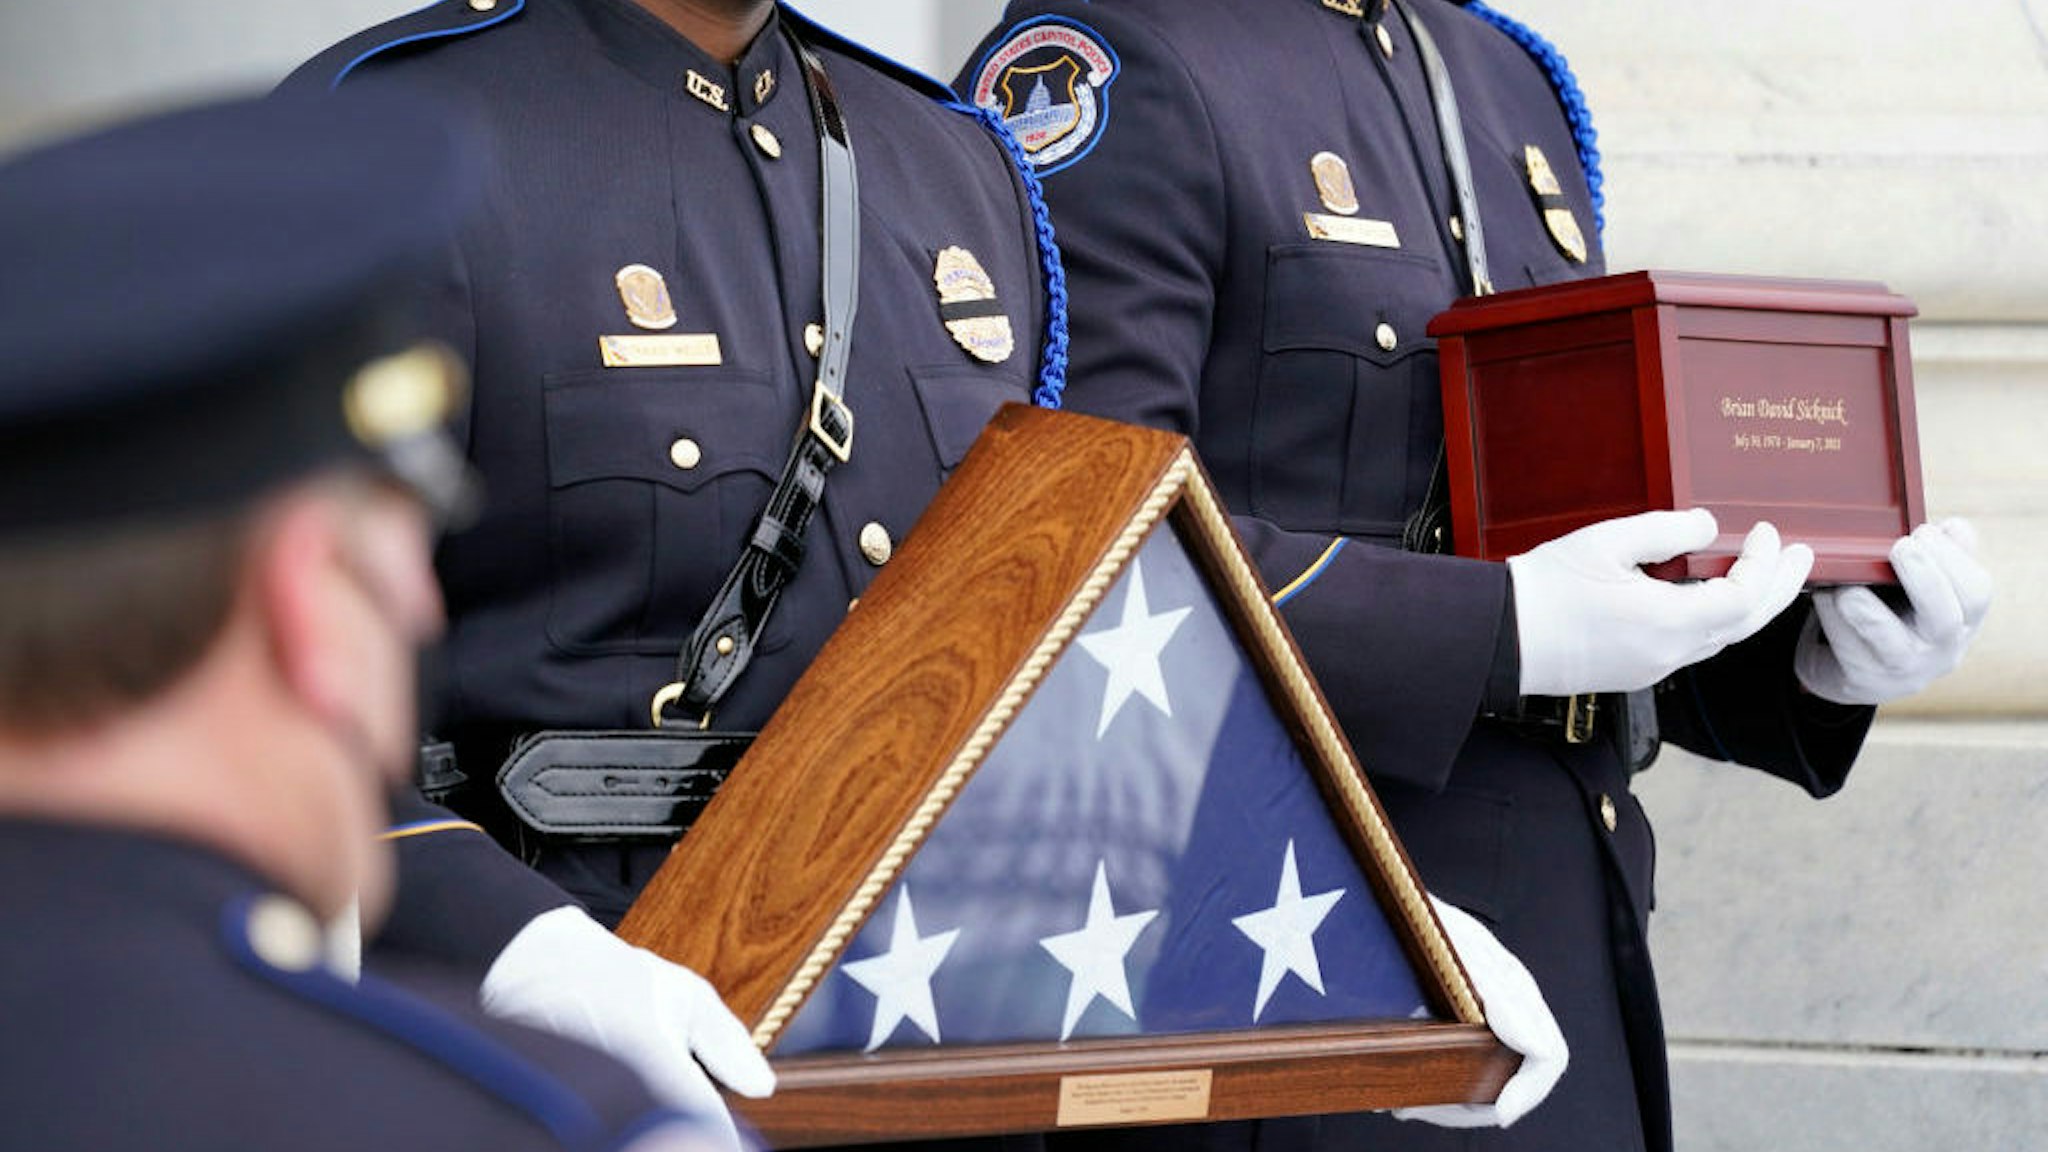 An honor guard carries an urn with the cremated remains of U.S. Capitol Police officer Brian Sicknick down the steps of the U.S Capitol, Wednesday, Feb. 3, 2021, in Washington. (AP Photo/Alex Brandon, Pool)